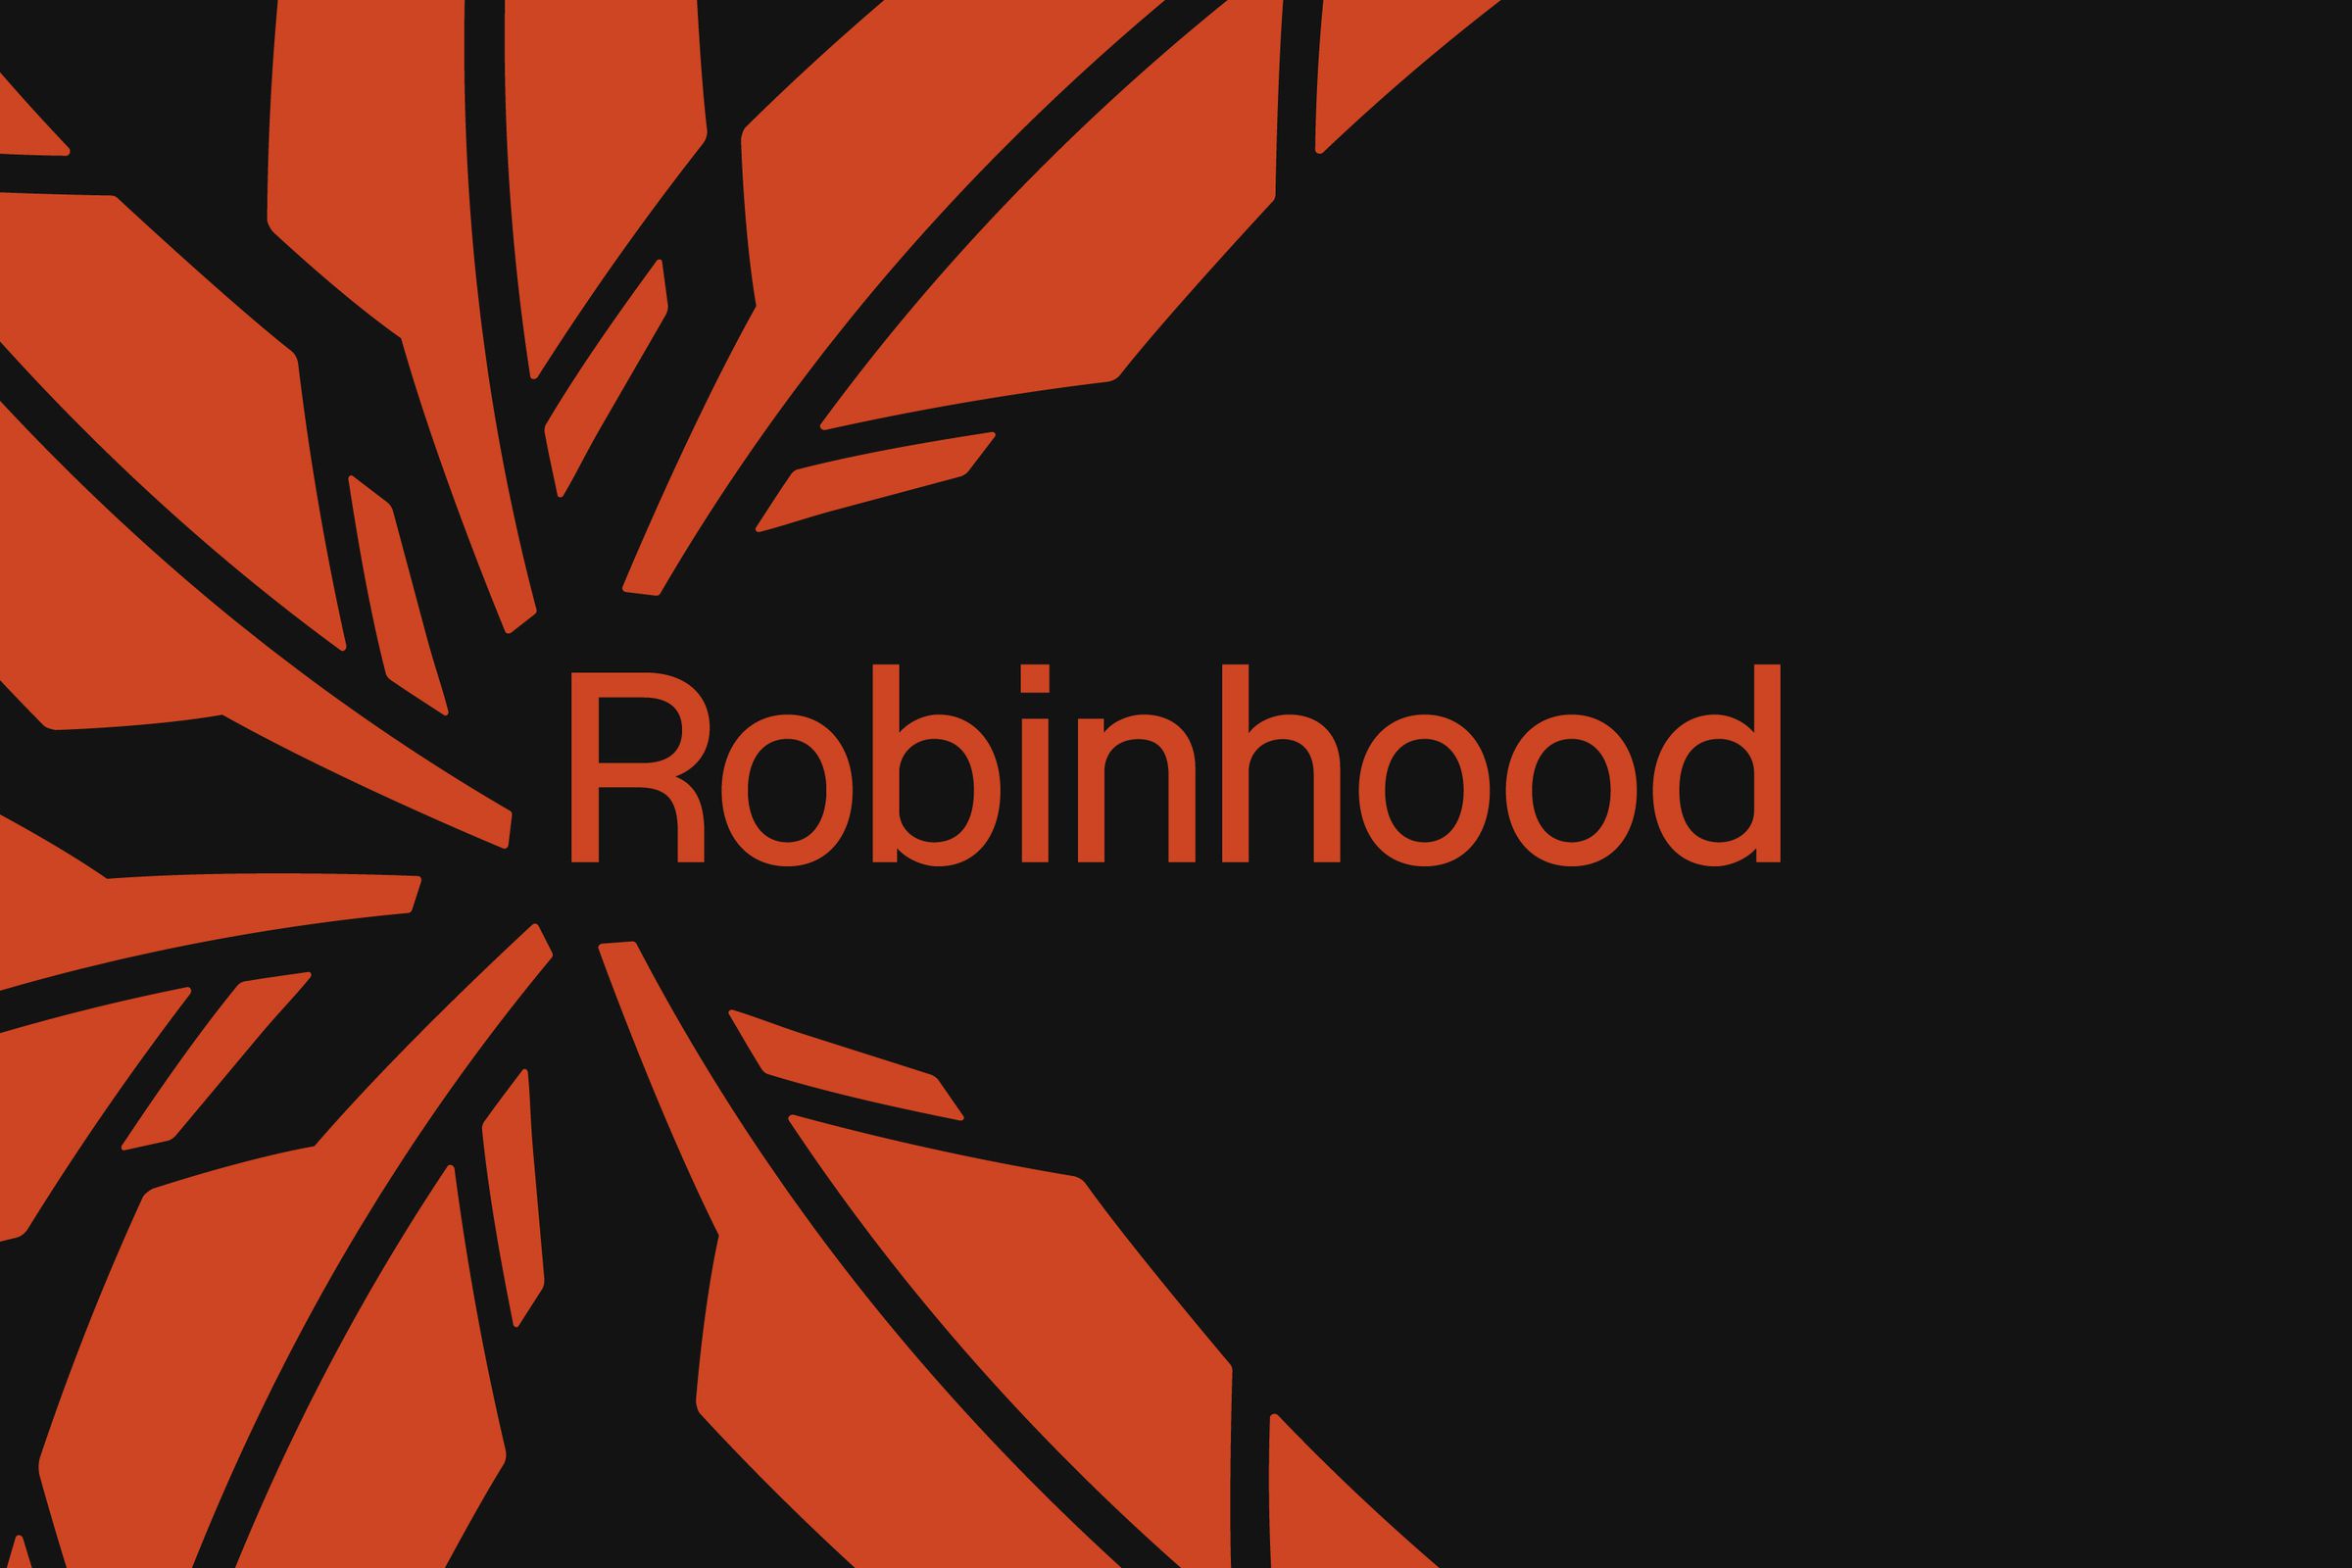 An image showing the Robinhood logo on a red and black background